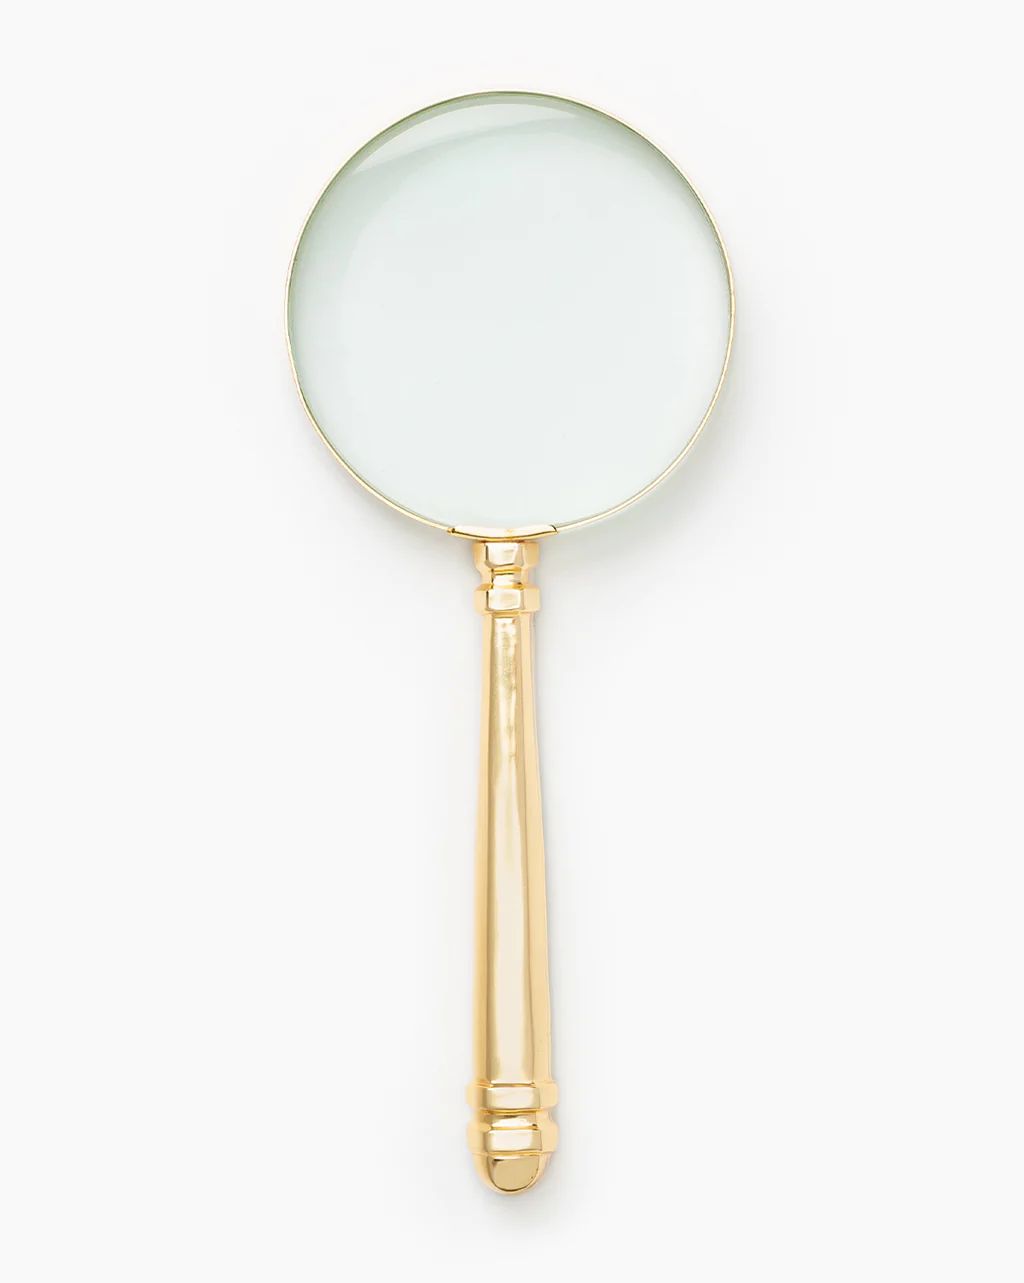 Gerard Brass Magnifying Glass | McGee & Co.